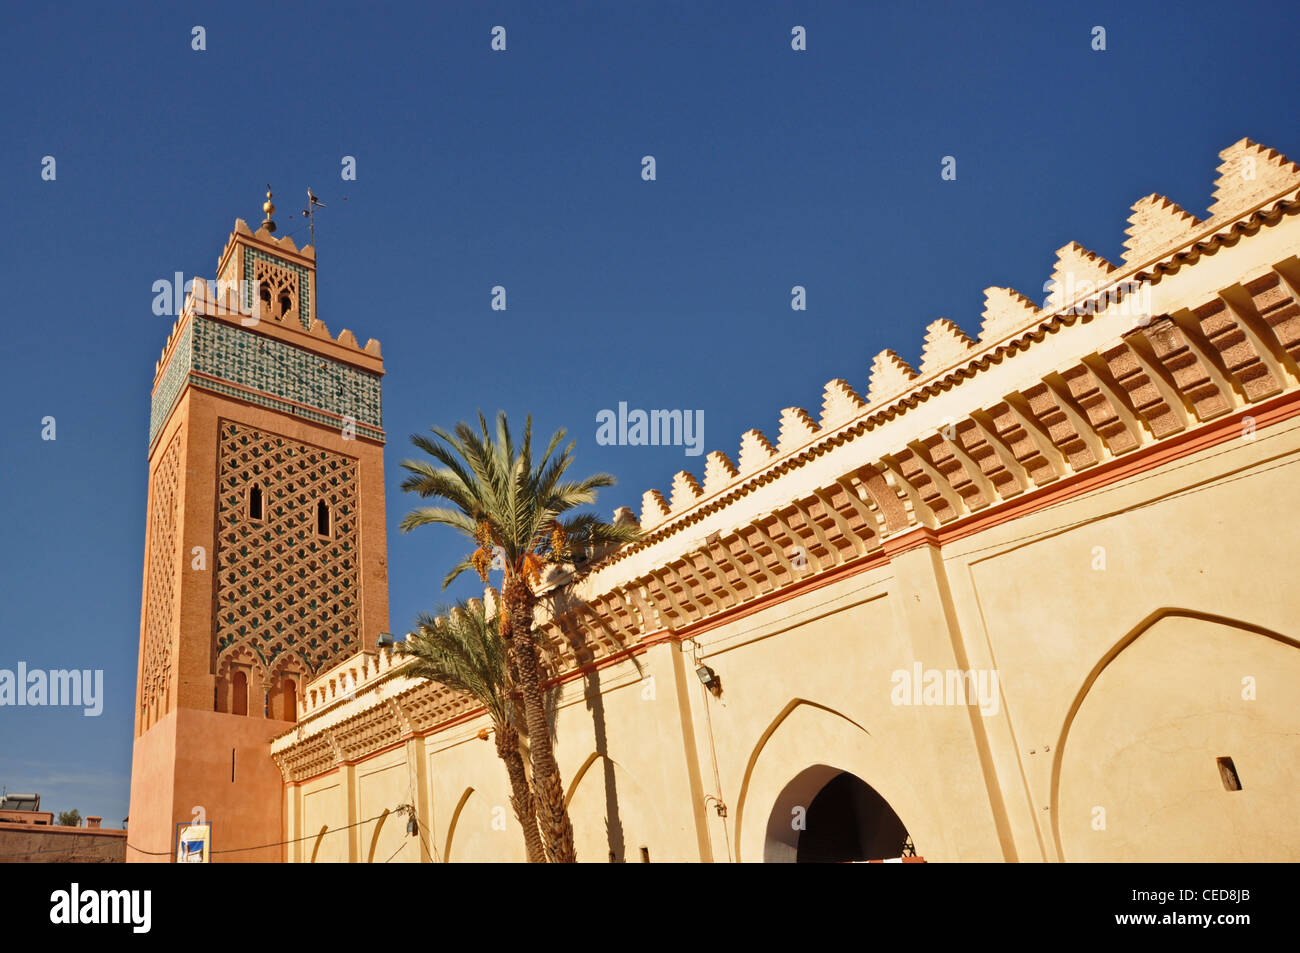 NORTH AFRICA, MOROCCO, Marrakesh, Kasbah Mosque Stock Photo